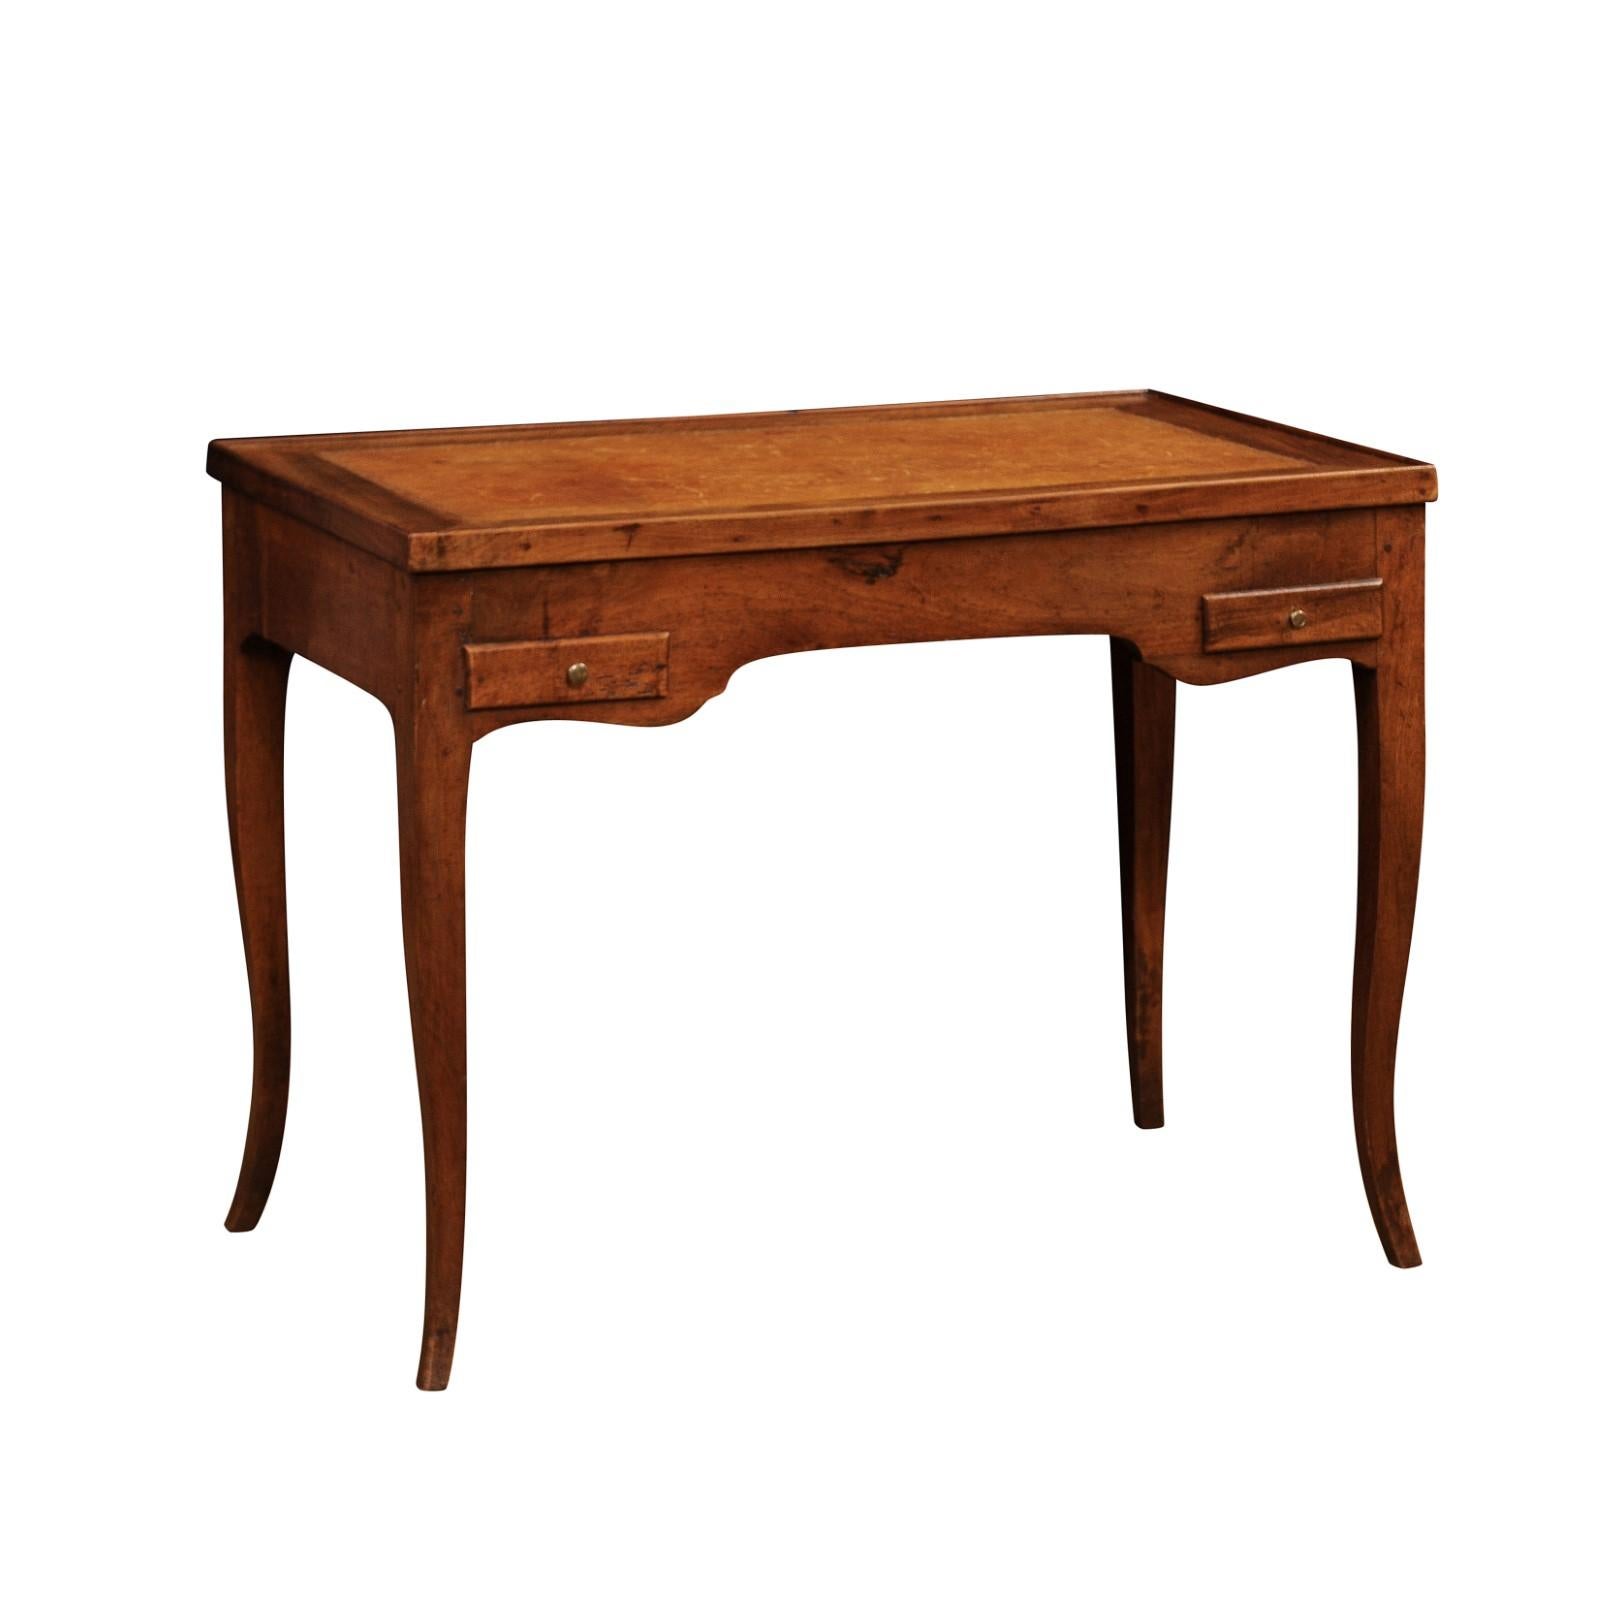 A French Louis XV period walnut tric trac game table from the late 18th century with removable top, two drawers and cabriole legs. Created in France towards the end of the reign of King Louis XV nicknamed Le Bien-Aimé in the third quarter of the